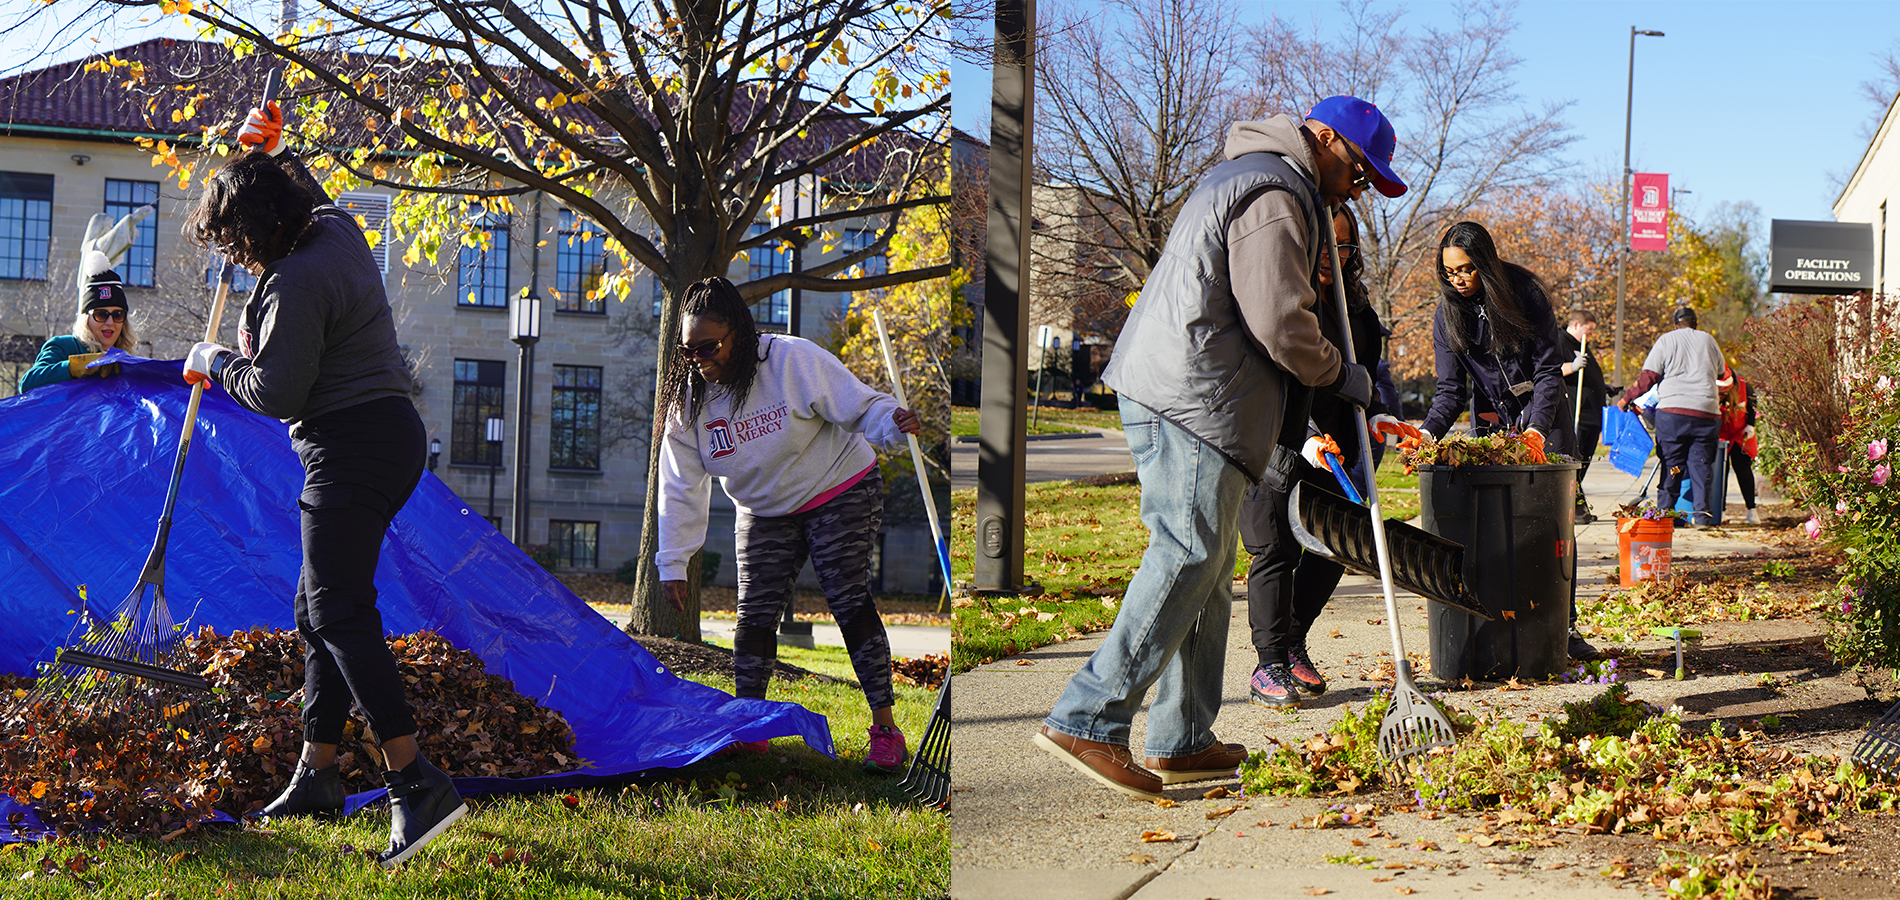 Titan staff and faculty rake leaves and pull weeds outdoors on the McNichols Campus during a clean-up event.